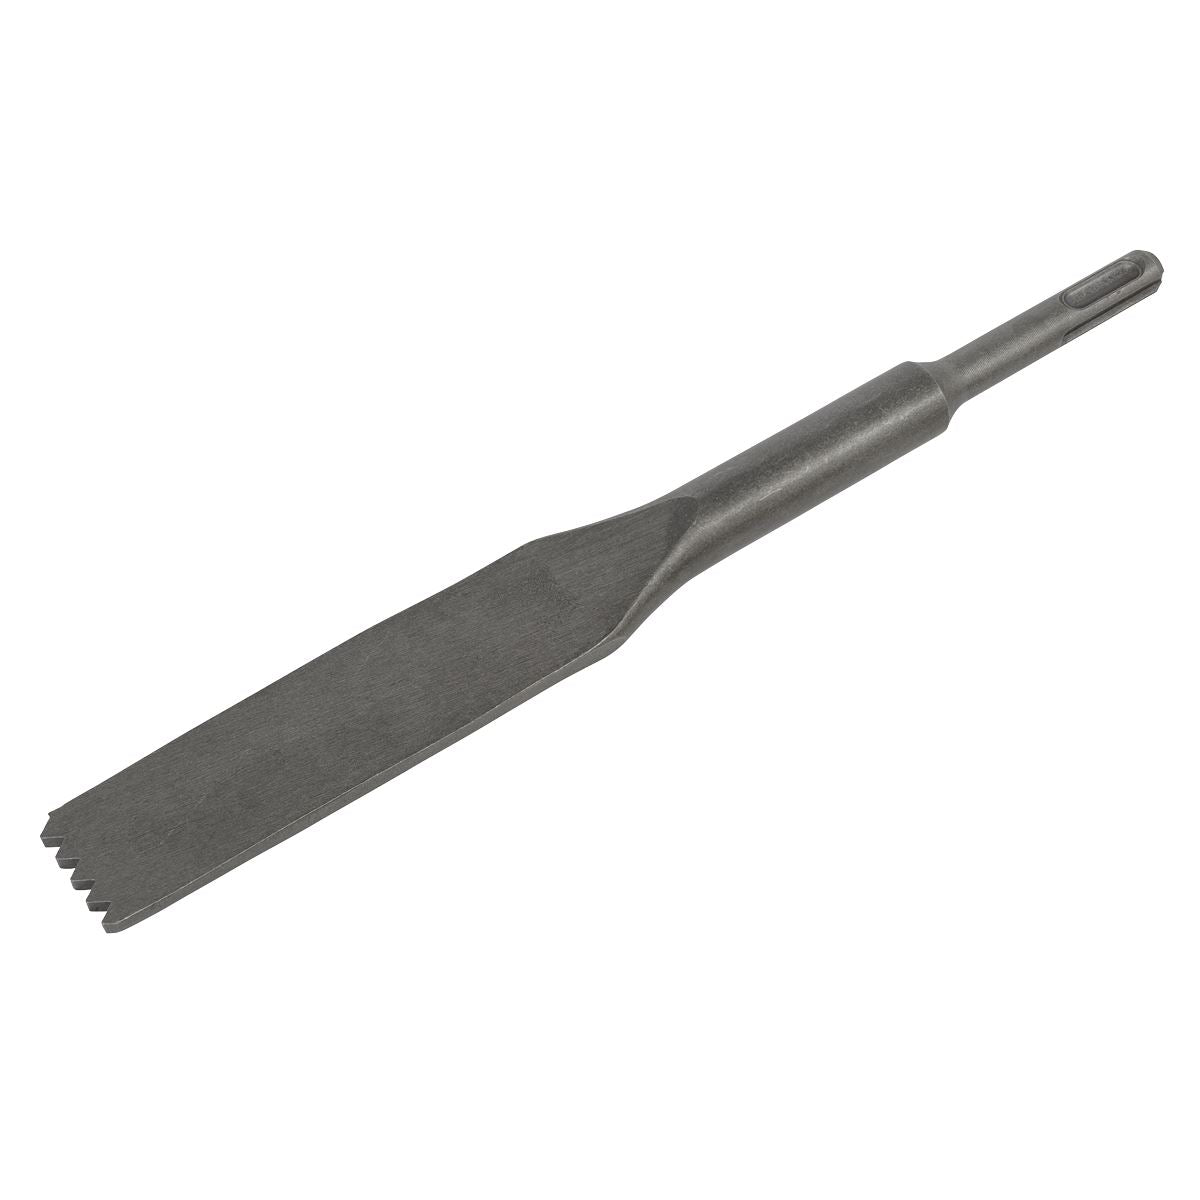 Sealey Toothed Mortar/Comb Chisel 30 x 250mm - SDS Plus